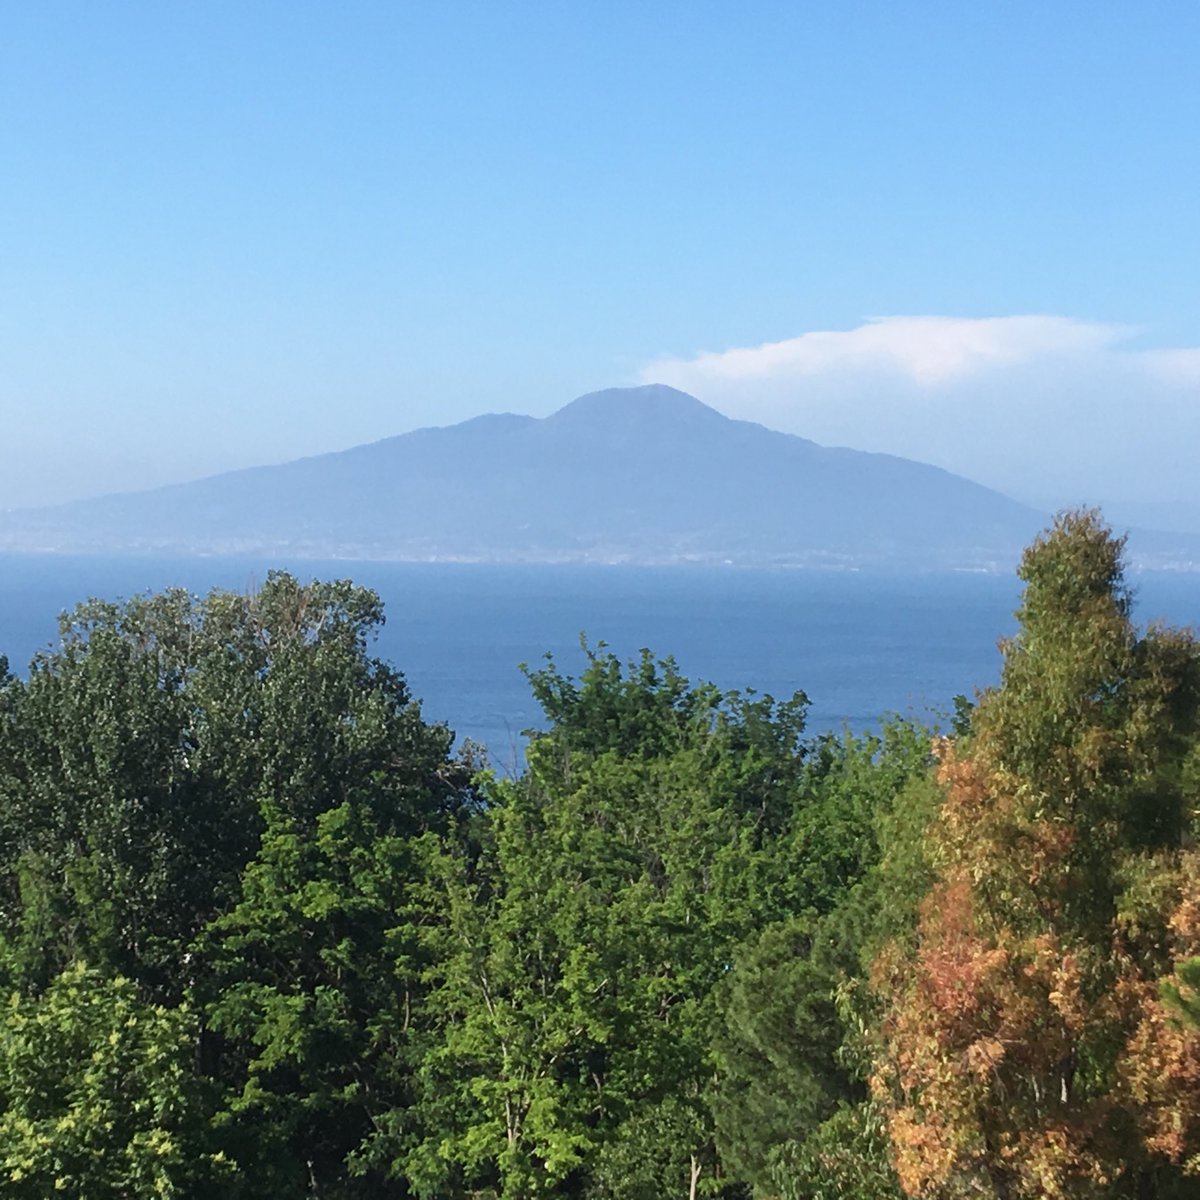 Great view of #Vesuvius from #Sorrento over the #BayOfNaples